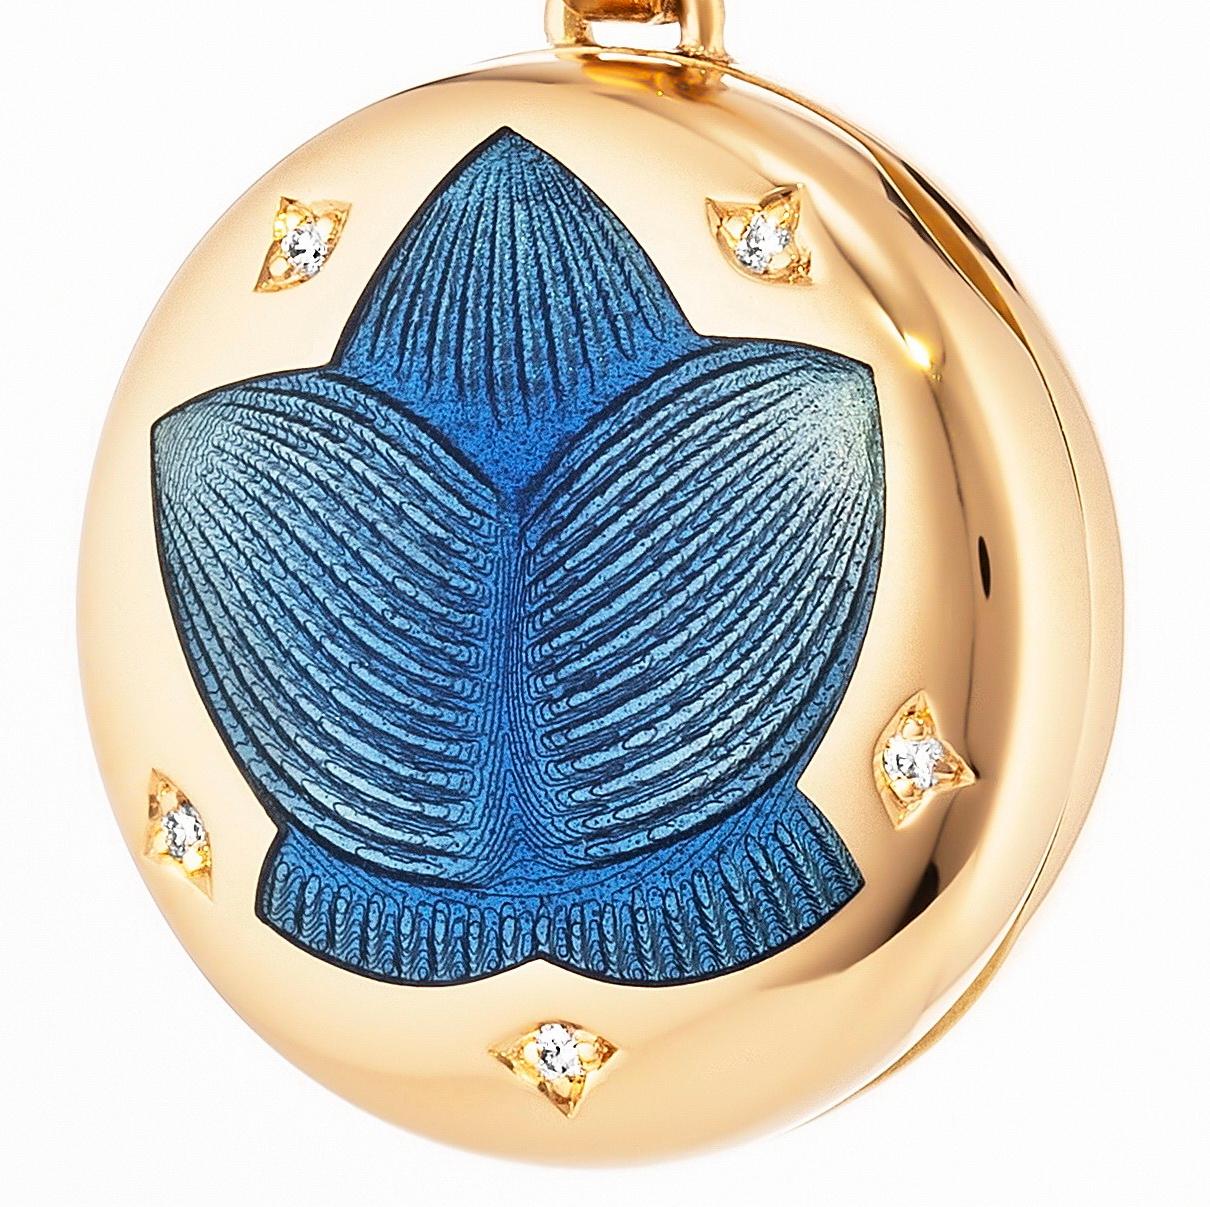 Victor Mayer customizable polished round locket pendant necklace 18k yellow gold, Merian Collection, opalescent middle blue vitreous enamel, 5 diamonds, total 0.03 ct, G VS, brilliant cut, diameter app. 21.0 mm

About the creator Victor Mayer
Victor